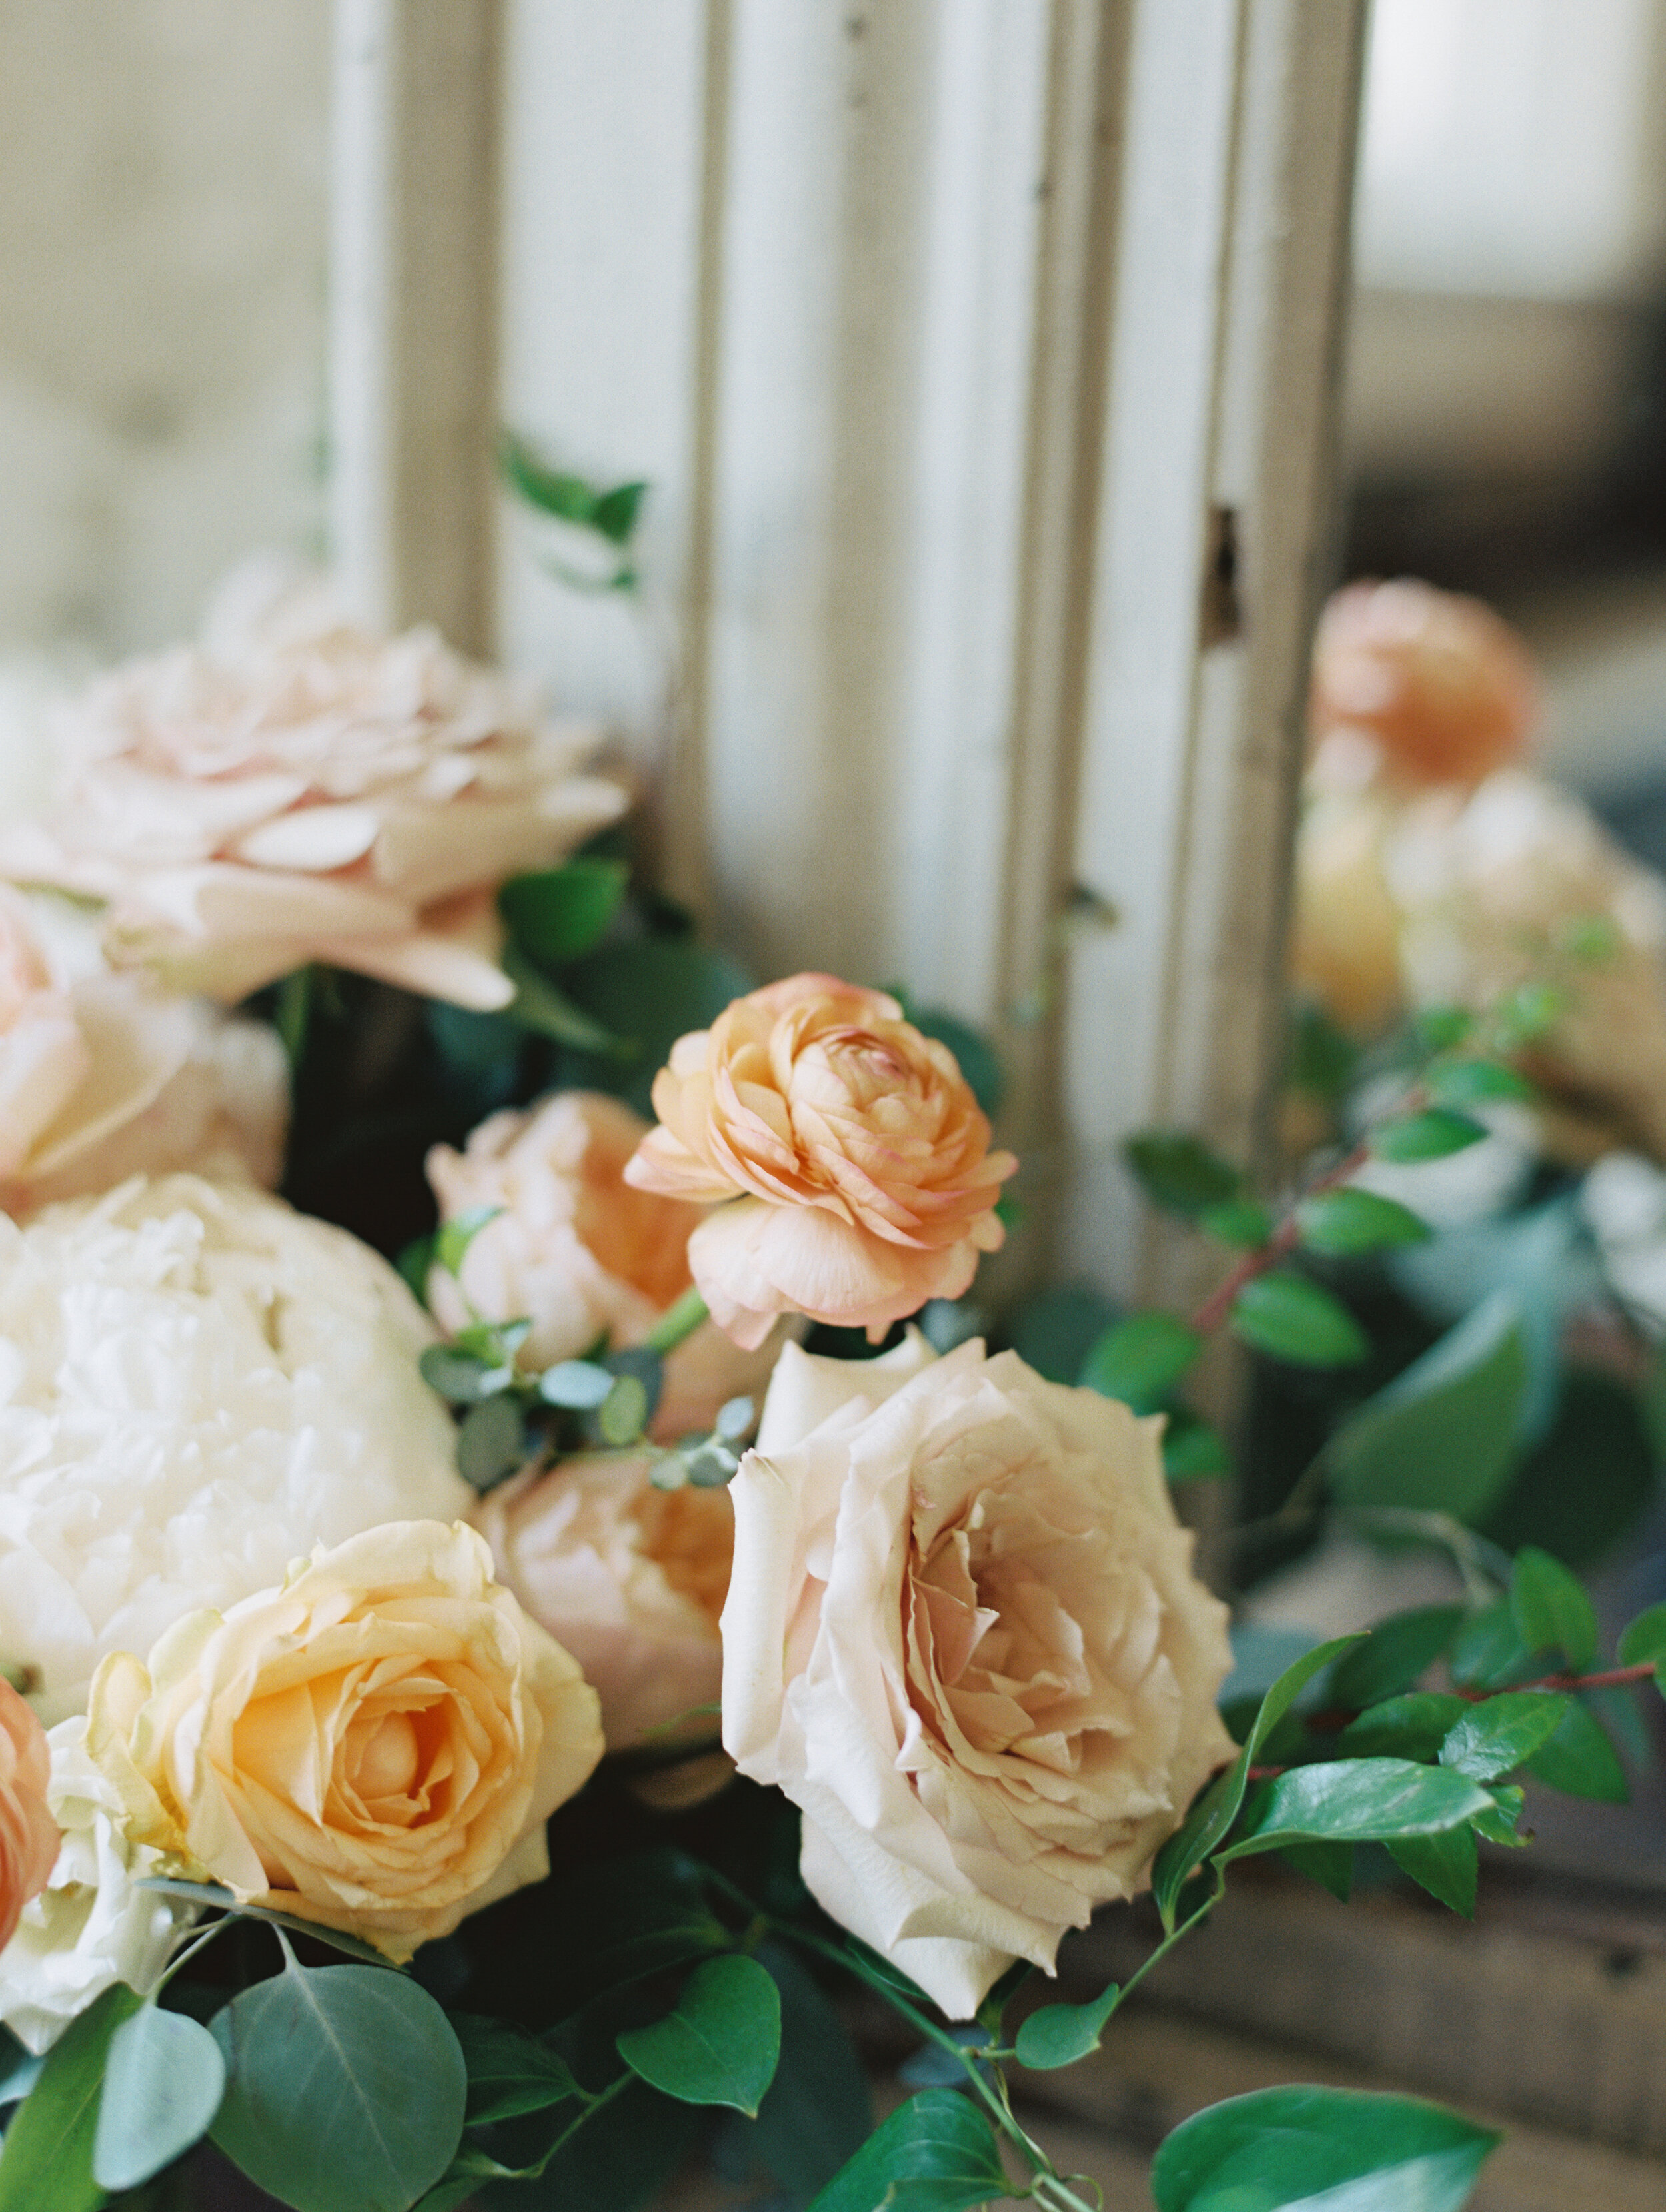 Bridal bouquet with peach ranunculus, cream peonies, blush and golden yellow garden roses, and natural, untamed greenery. June wedding at the Cordelle. Nashville Wedding Florist.